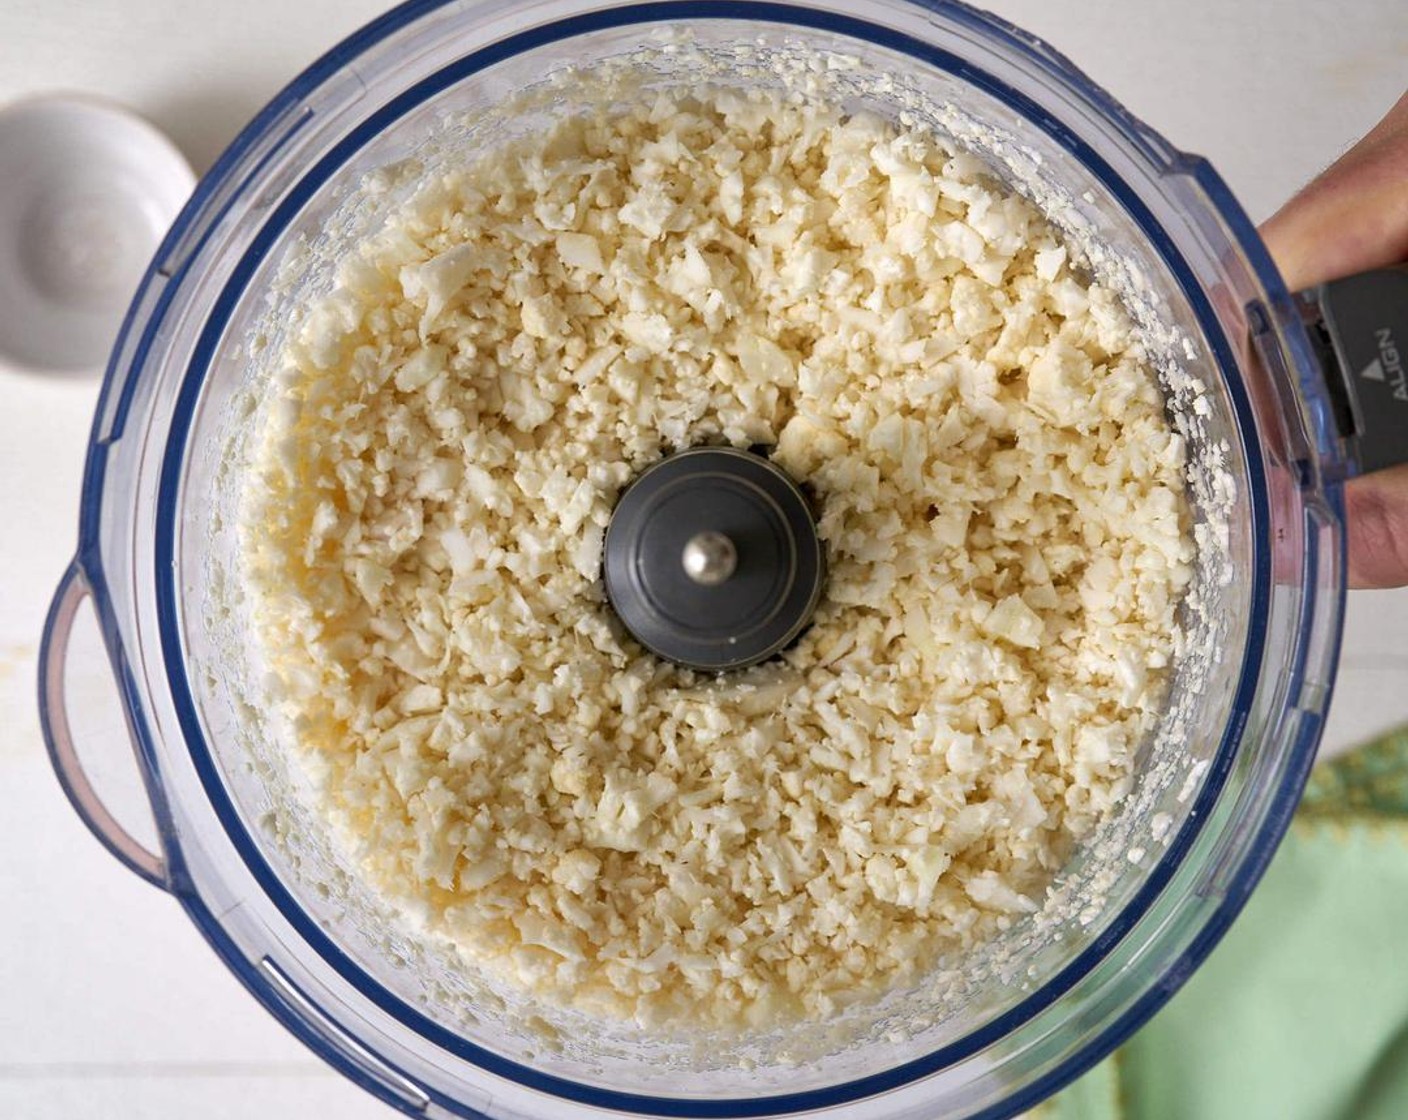 step 1 The quickest way to "rice" your Cauliflower (1 head) is to toss it into a food processor and blitz it for less than a minute until it's the size of rice. Otherwise, go old school and use a cheese grater.